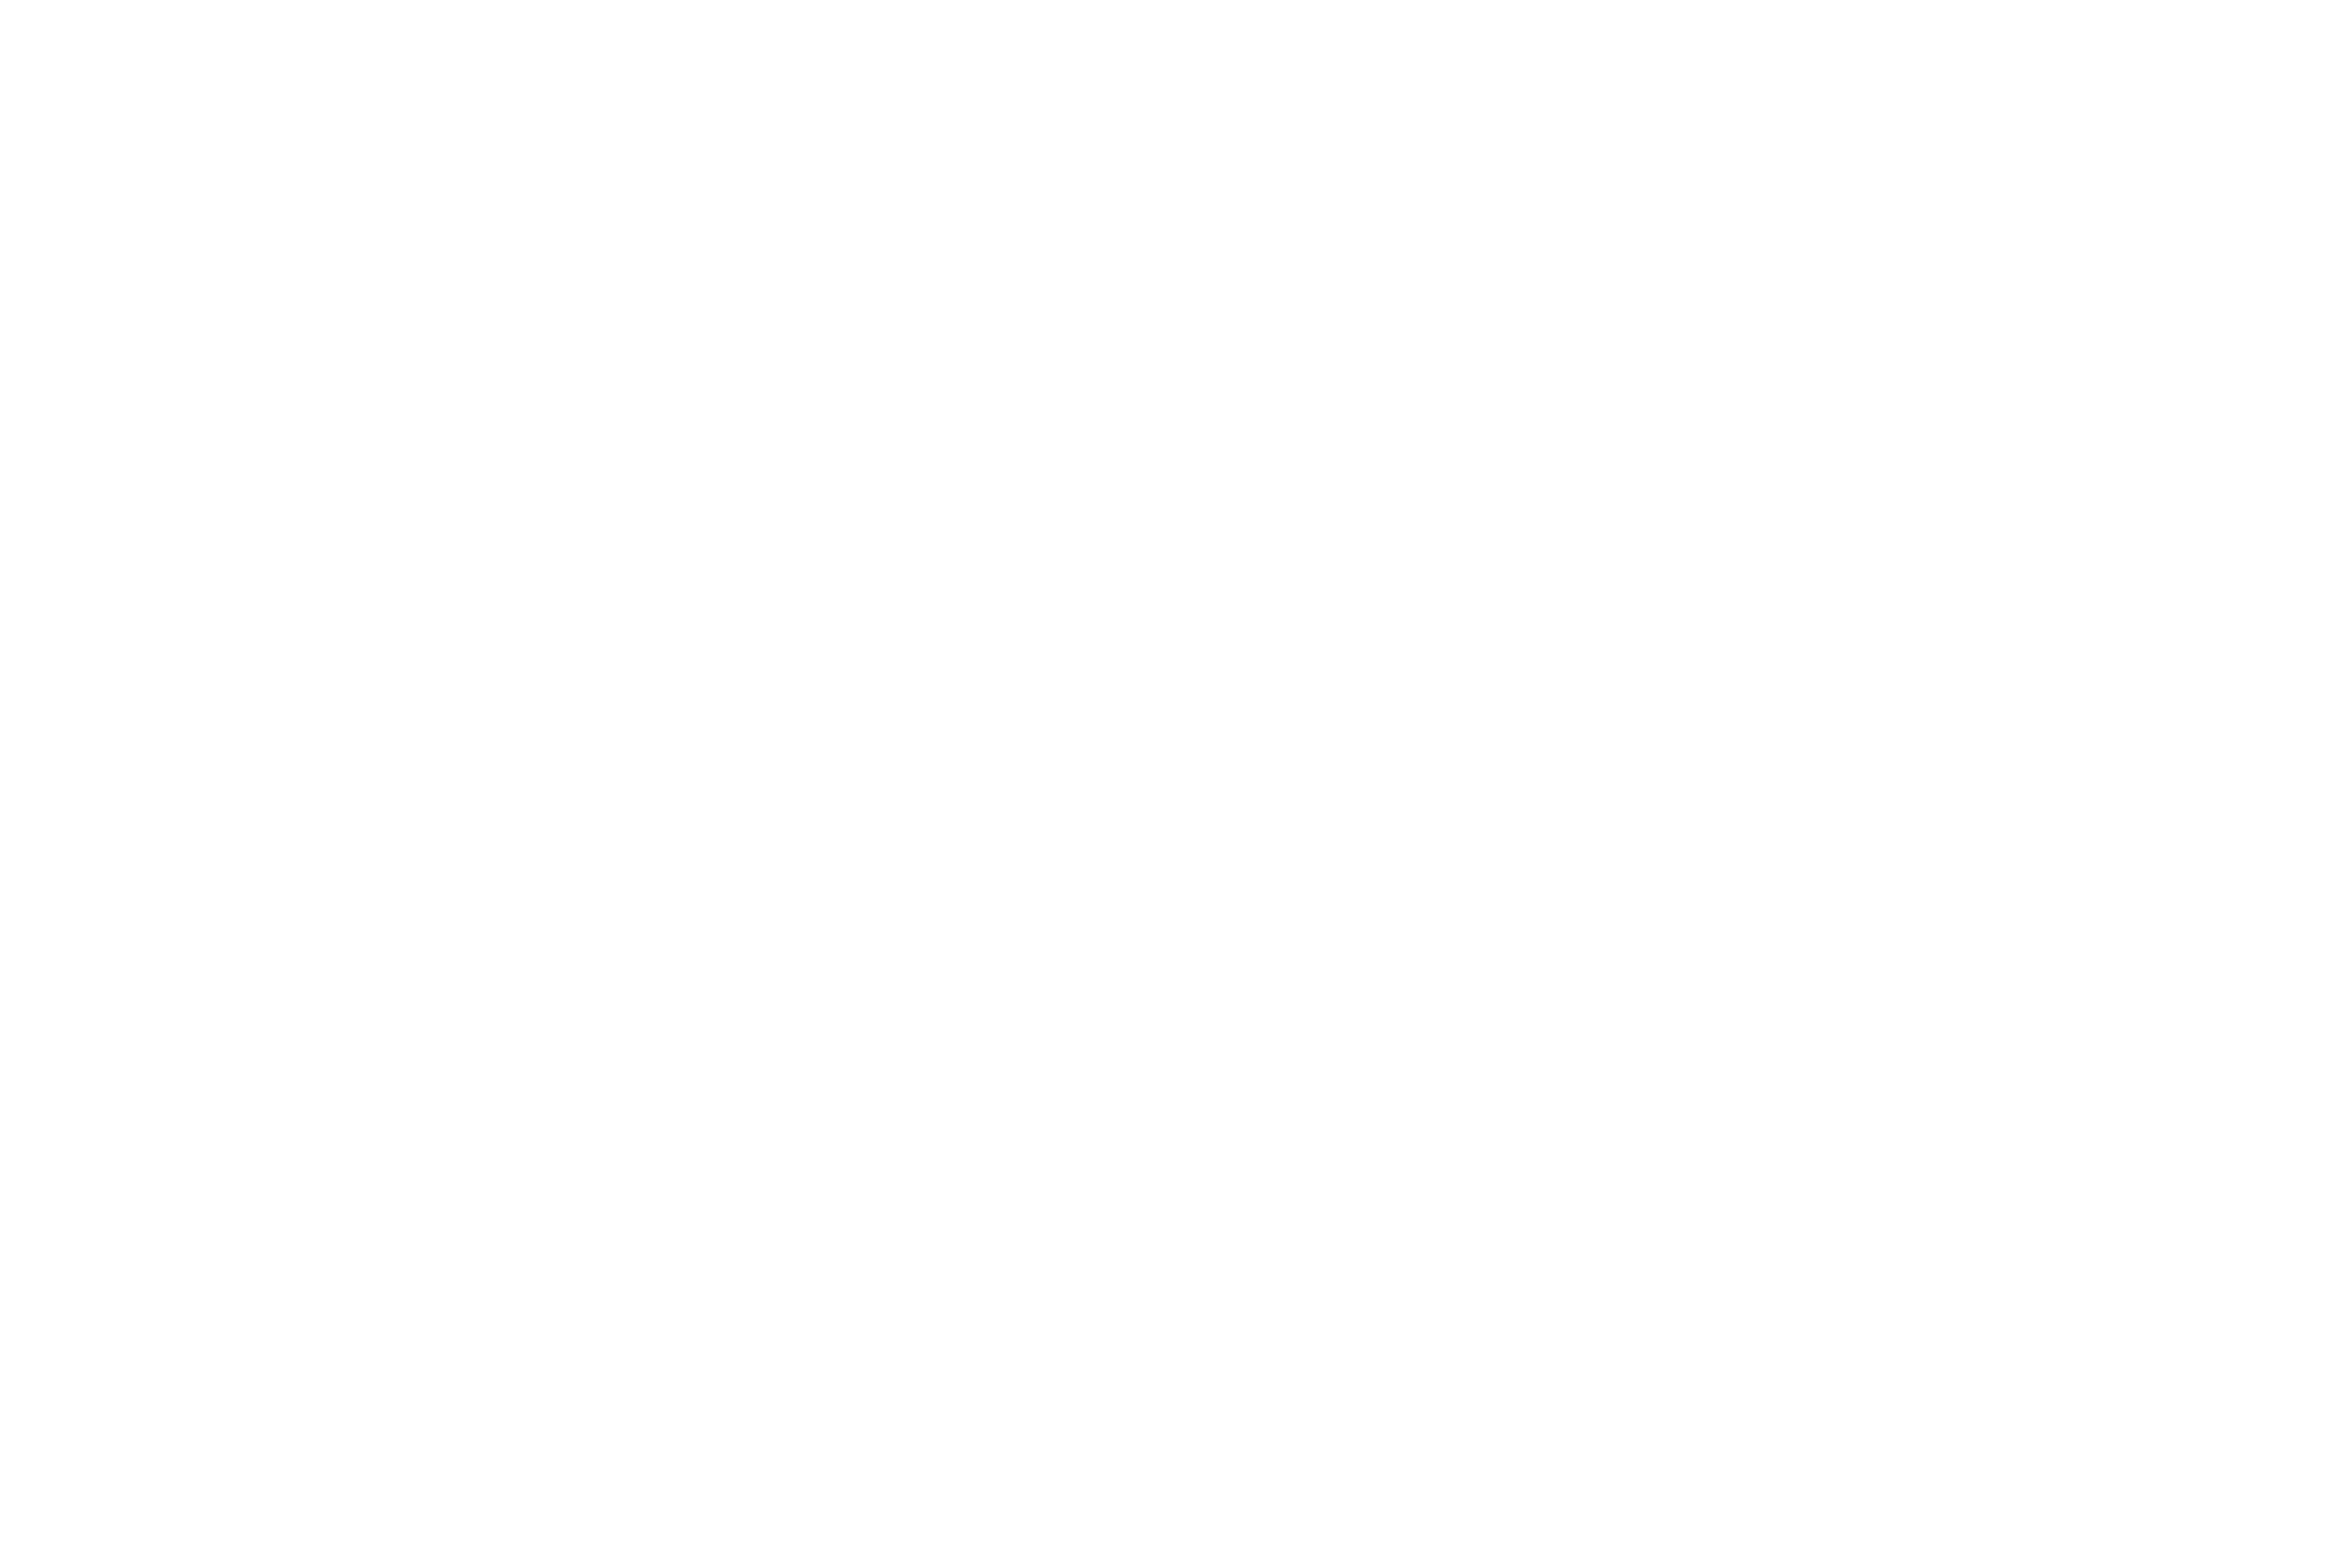 Display Productions